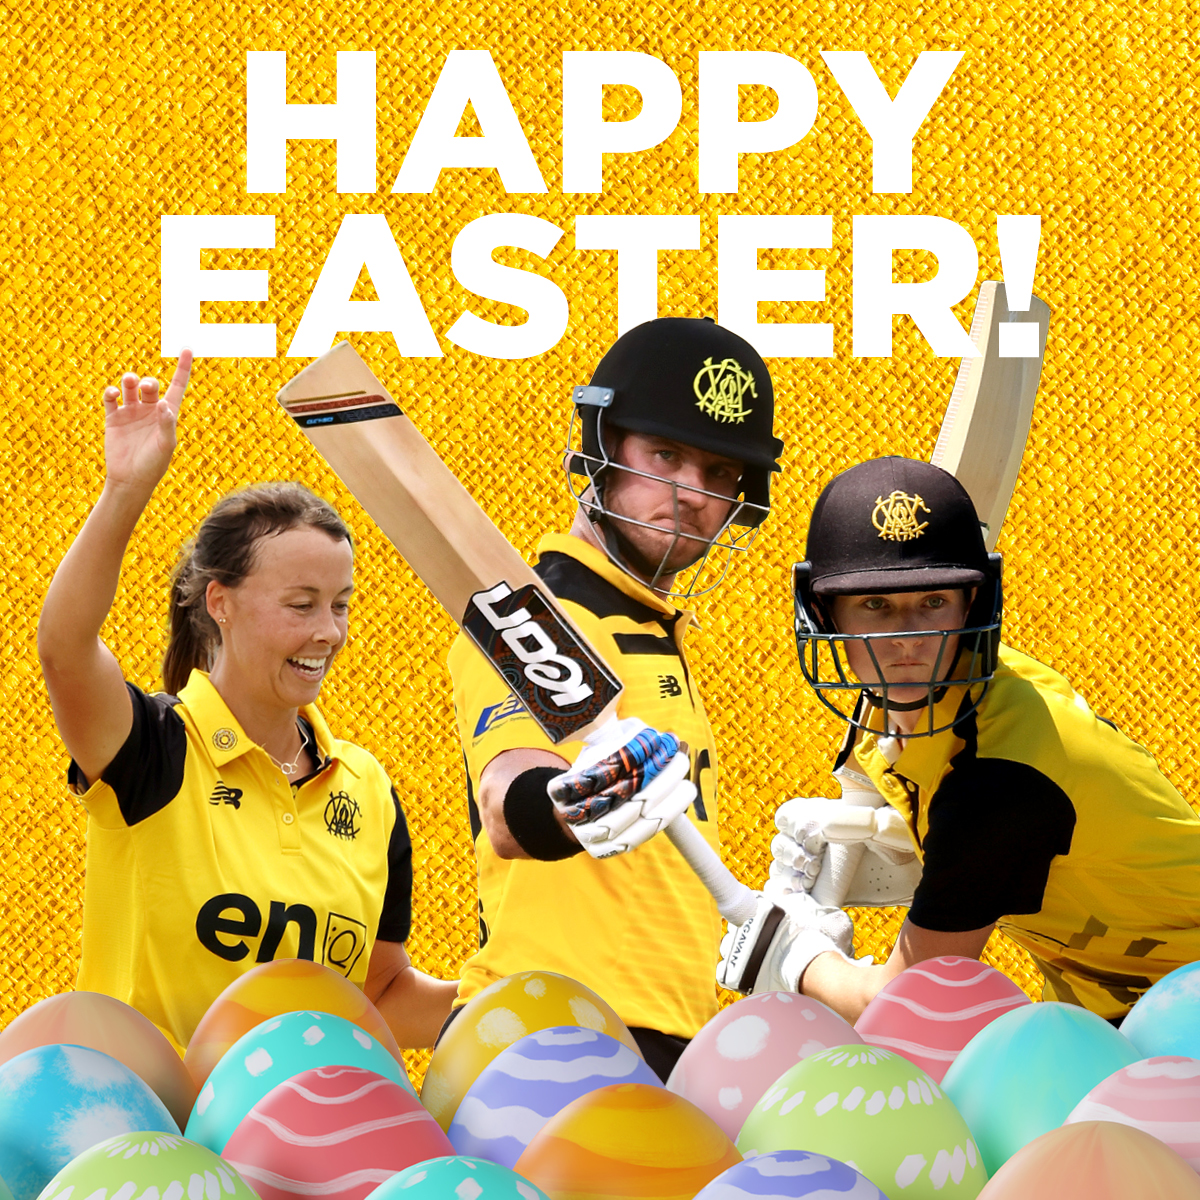 Happy Easter WA! 🐰 Enjoy the holiday and the Easter Egg hunt 🥚😁 #WESTISBEST